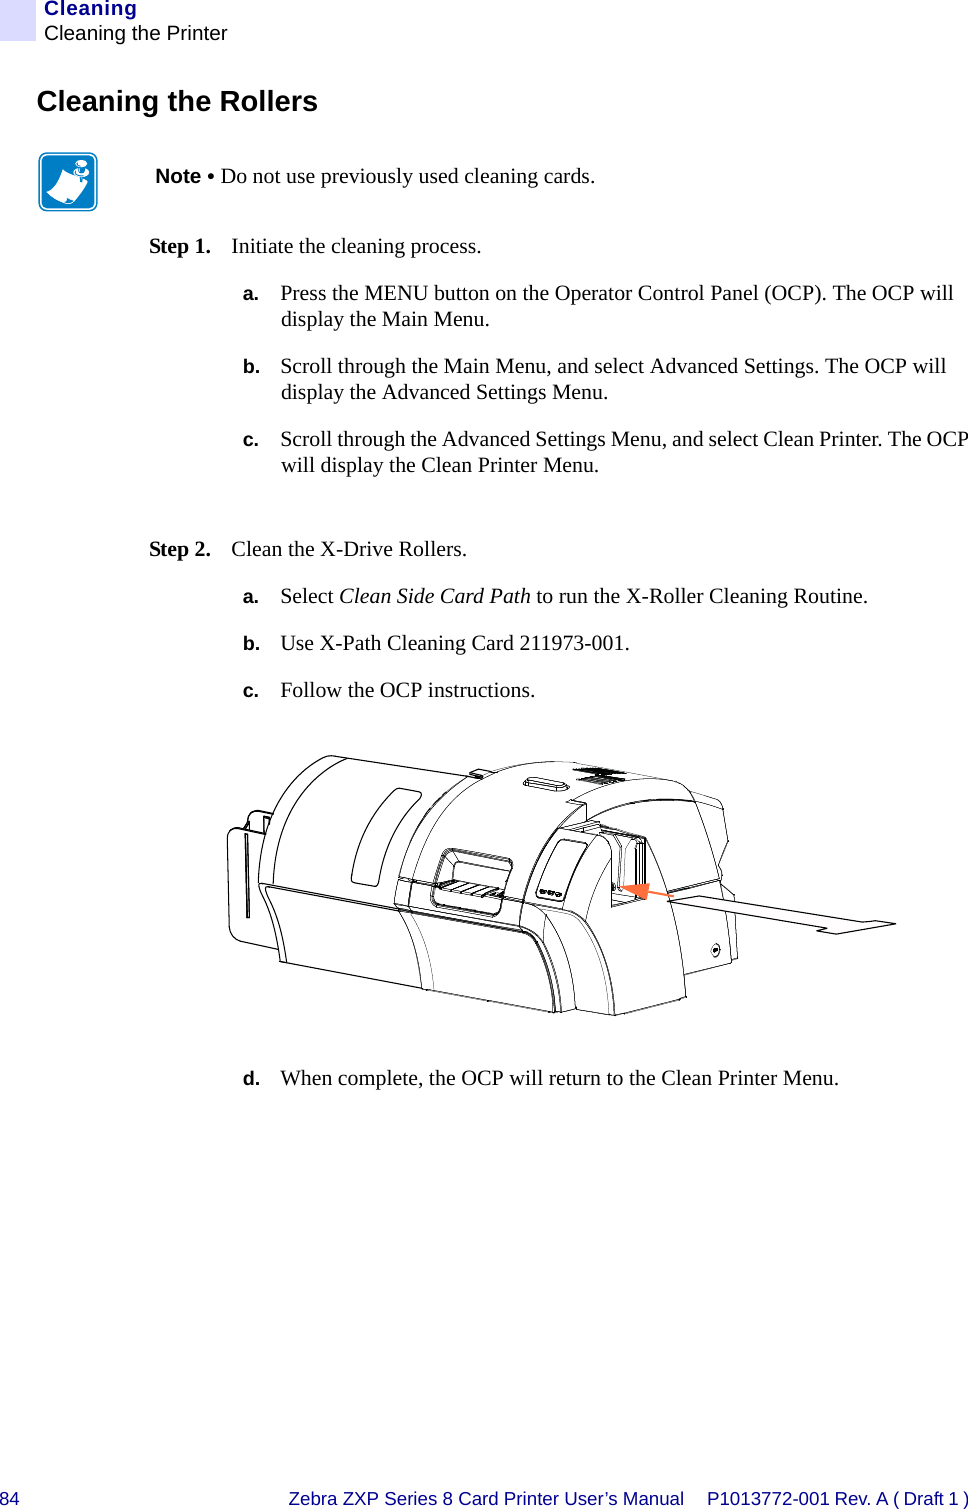 84 Zebra ZXP Series 8 Card Printer User’s Manual P1013772-001 Rev. A ( Draft 1 ) CleaningCleaning the PrinterCleaning the RollersStep 1. Initiate the cleaning process.a. Press the MENU button on the Operator Control Panel (OCP). The OCP will display the Main Menu.b. Scroll through the Main Menu, and select Advanced Settings. The OCP will display the Advanced Settings Menu.c. Scroll through the Advanced Settings Menu, and select Clean Printer. The OCP will display the Clean Printer Menu.Step 2. Clean the X-Drive Rollers.a. Select Clean Side Card Path to run the X-Roller Cleaning Routine.b. Use X-Path Cleaning Card 211973-001.c. Follow the OCP instructions.d. When complete, the OCP will return to the Clean Printer Menu.Note • Do not use previously used cleaning cards.